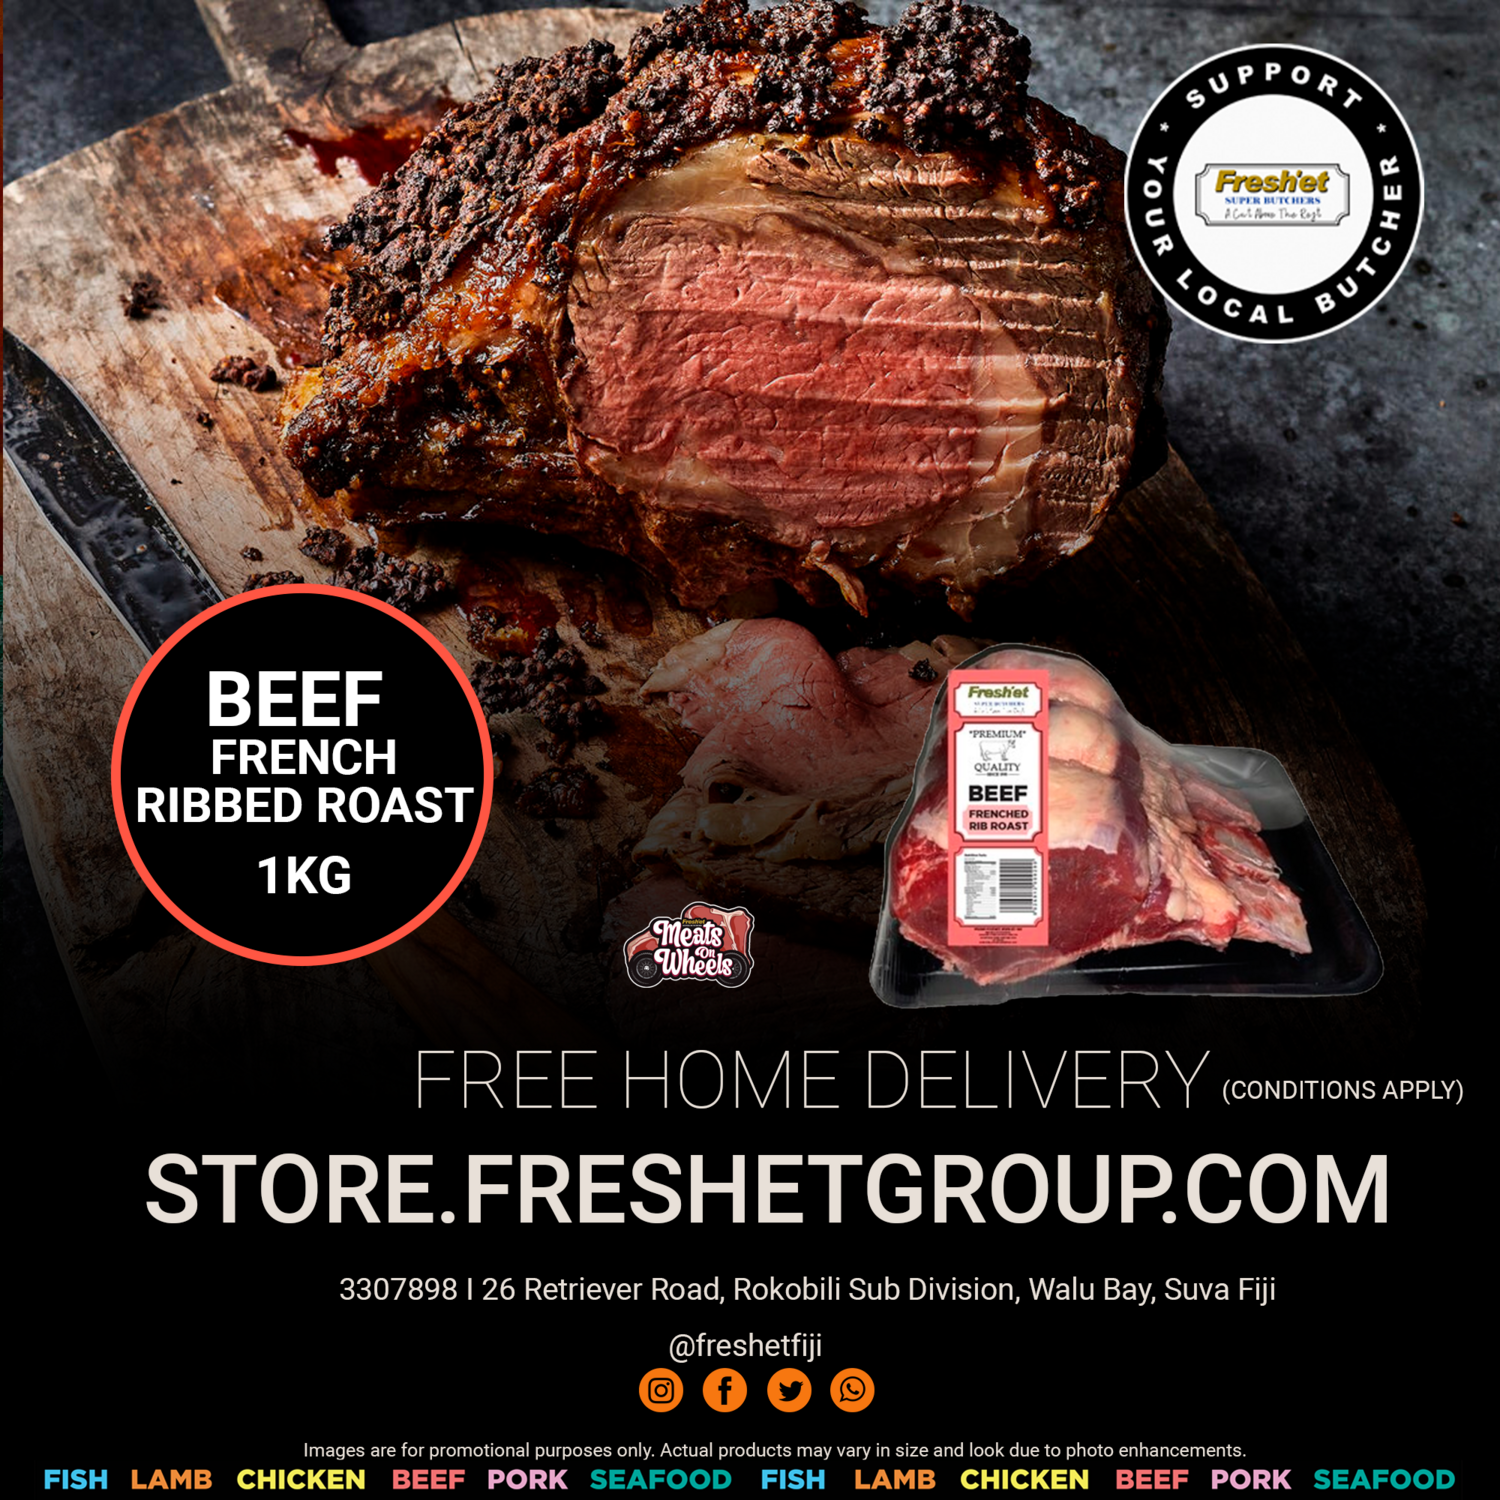 BEEF Frenched Rib Roast - 1KG